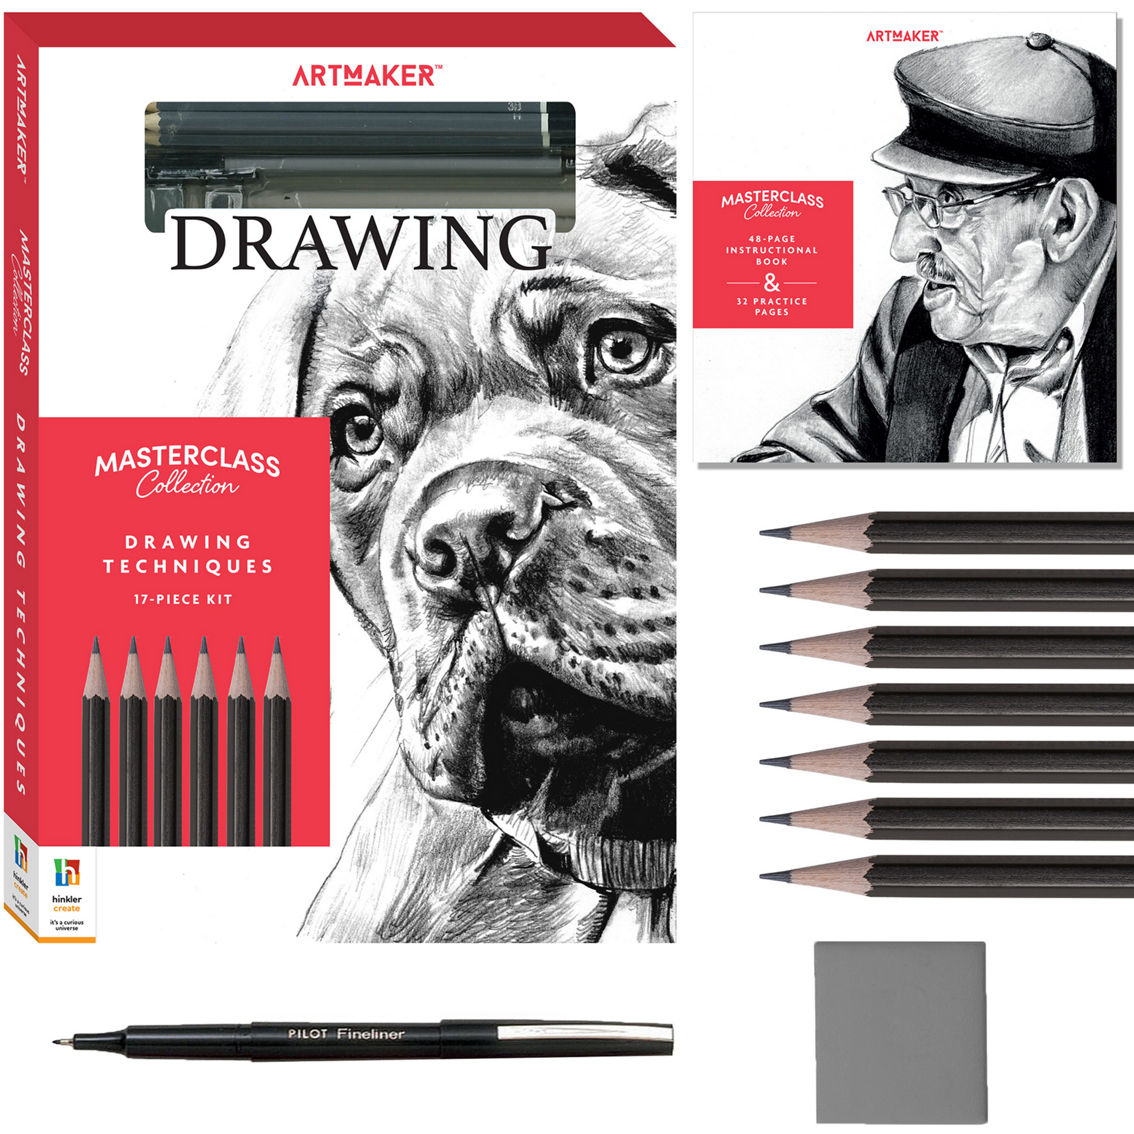 Hinkler Art Maker Masterclass Collection: Drawing Techniques Kit - Image 3 of 6